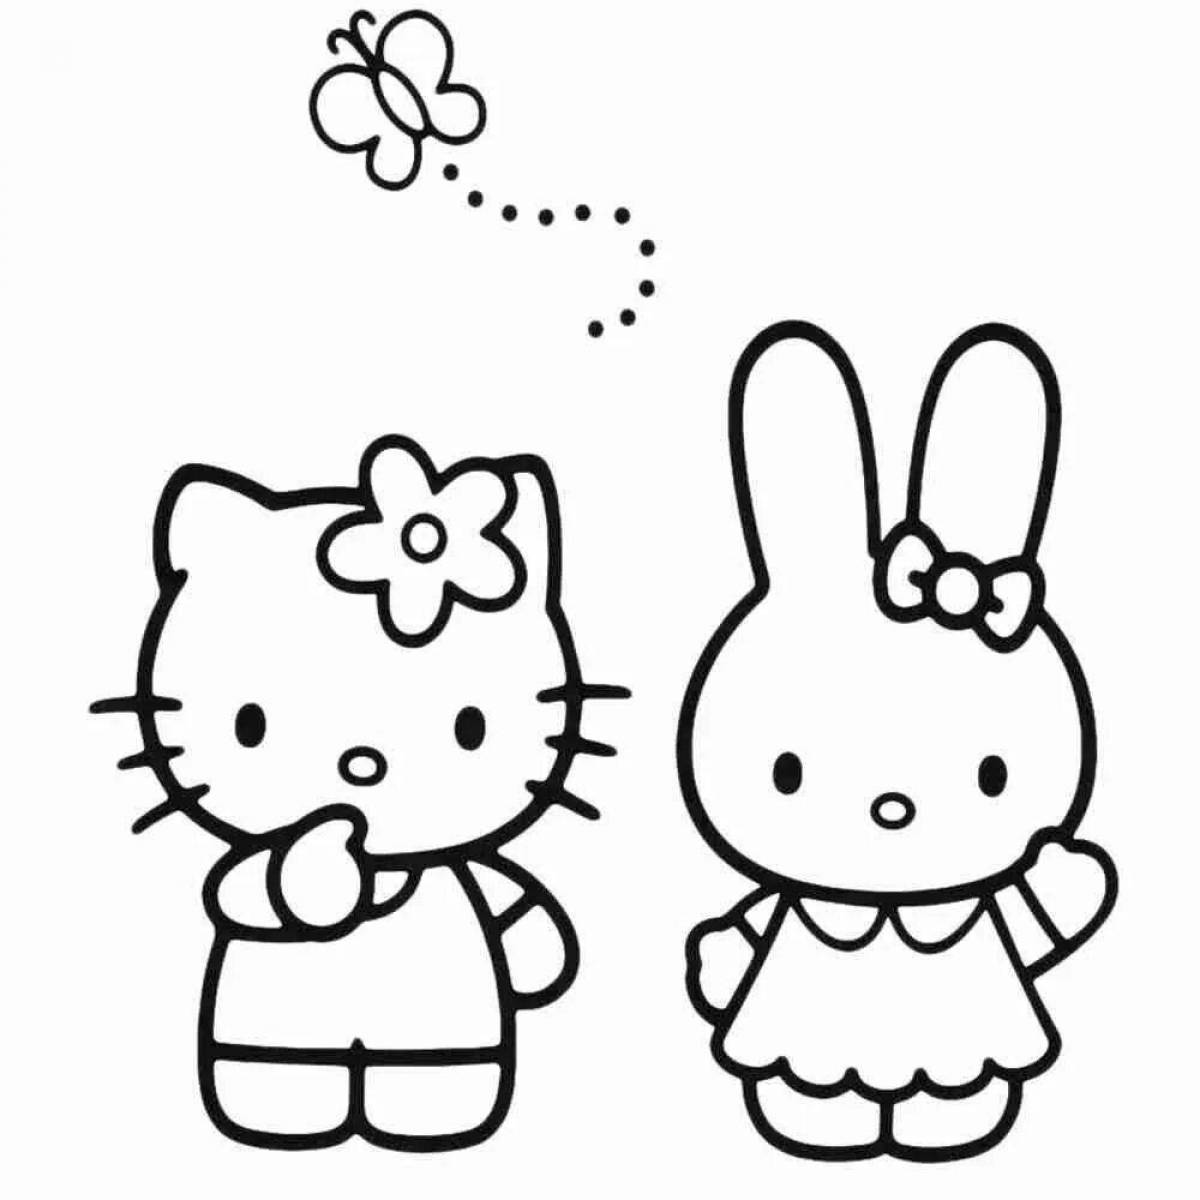 Irresistible kitty coloring book for kids